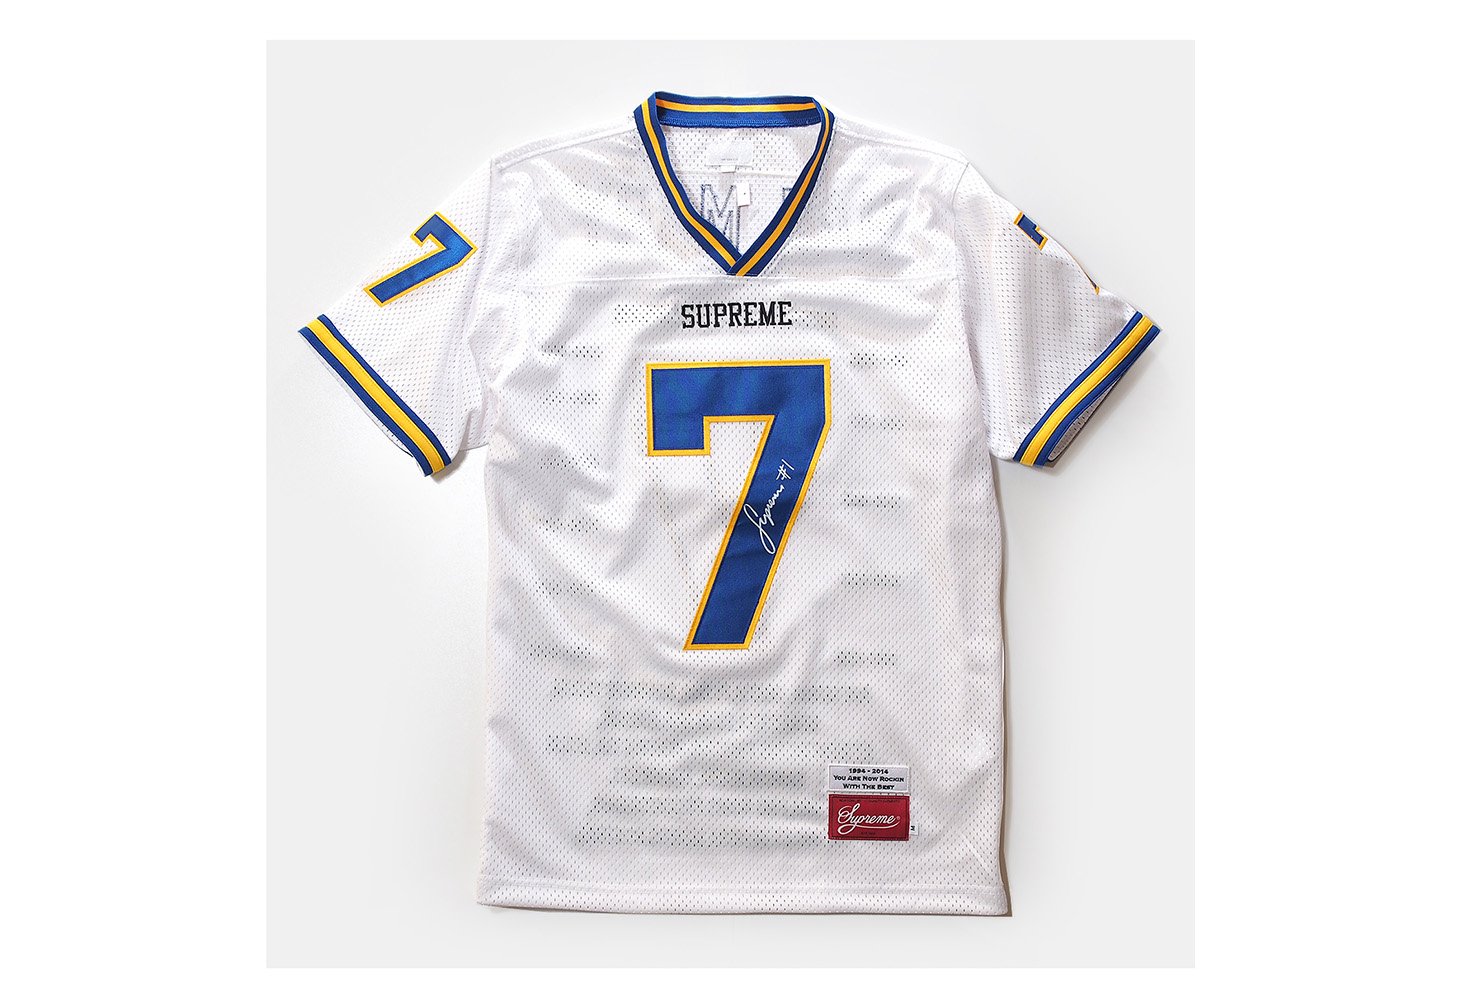 Supreme - Hail Mary Football Top - ParkSIDER